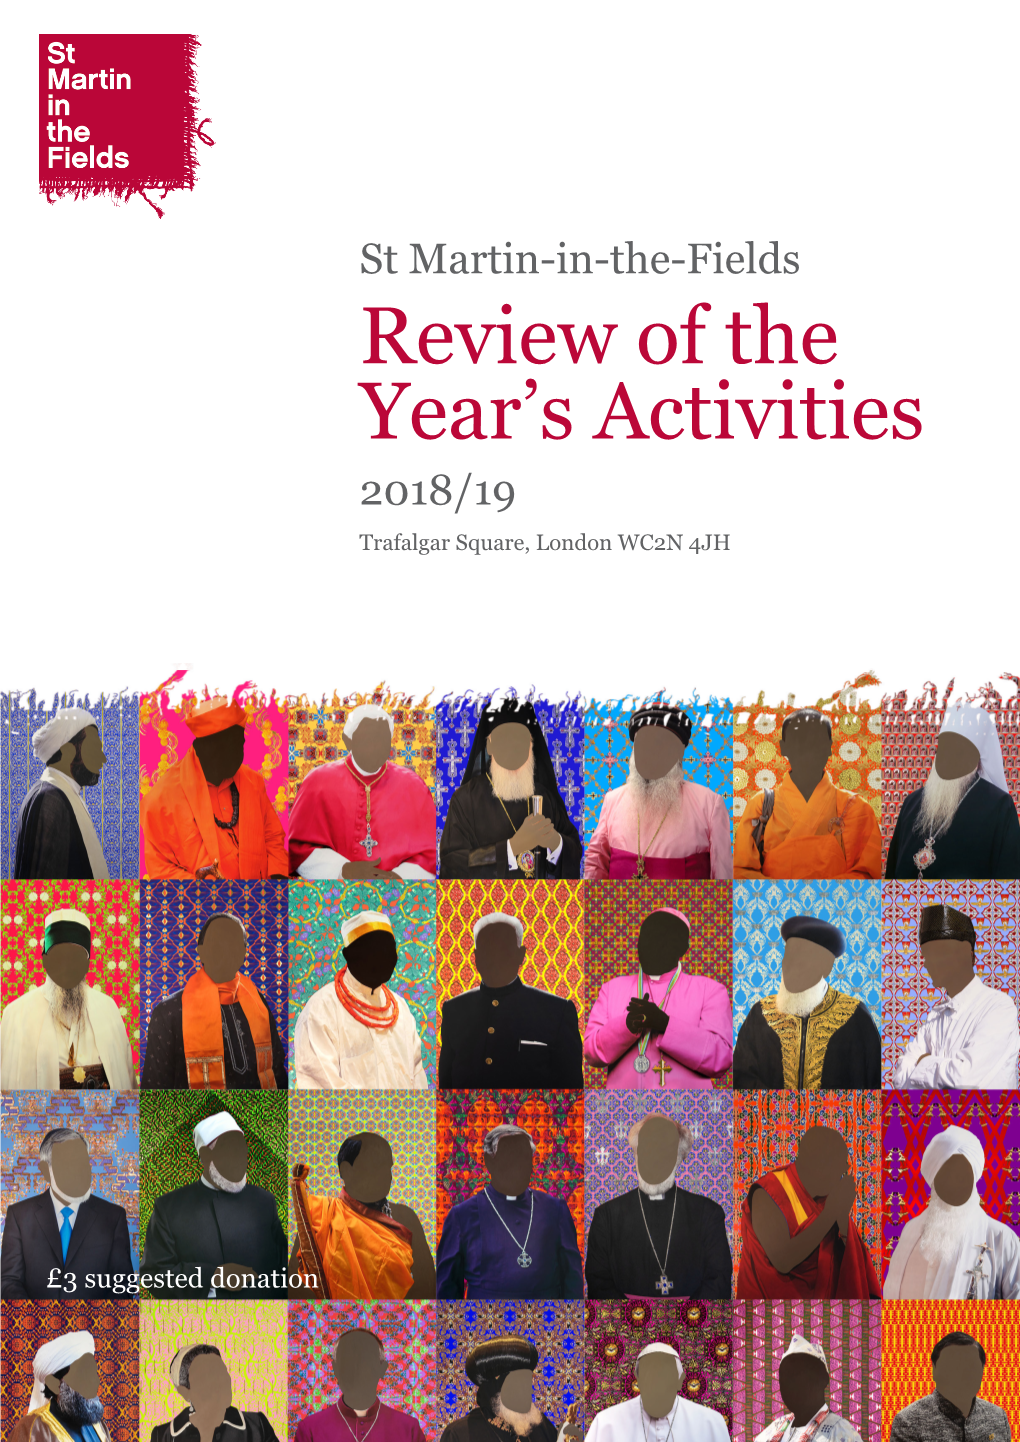 Annual Review of Activities 2018-19